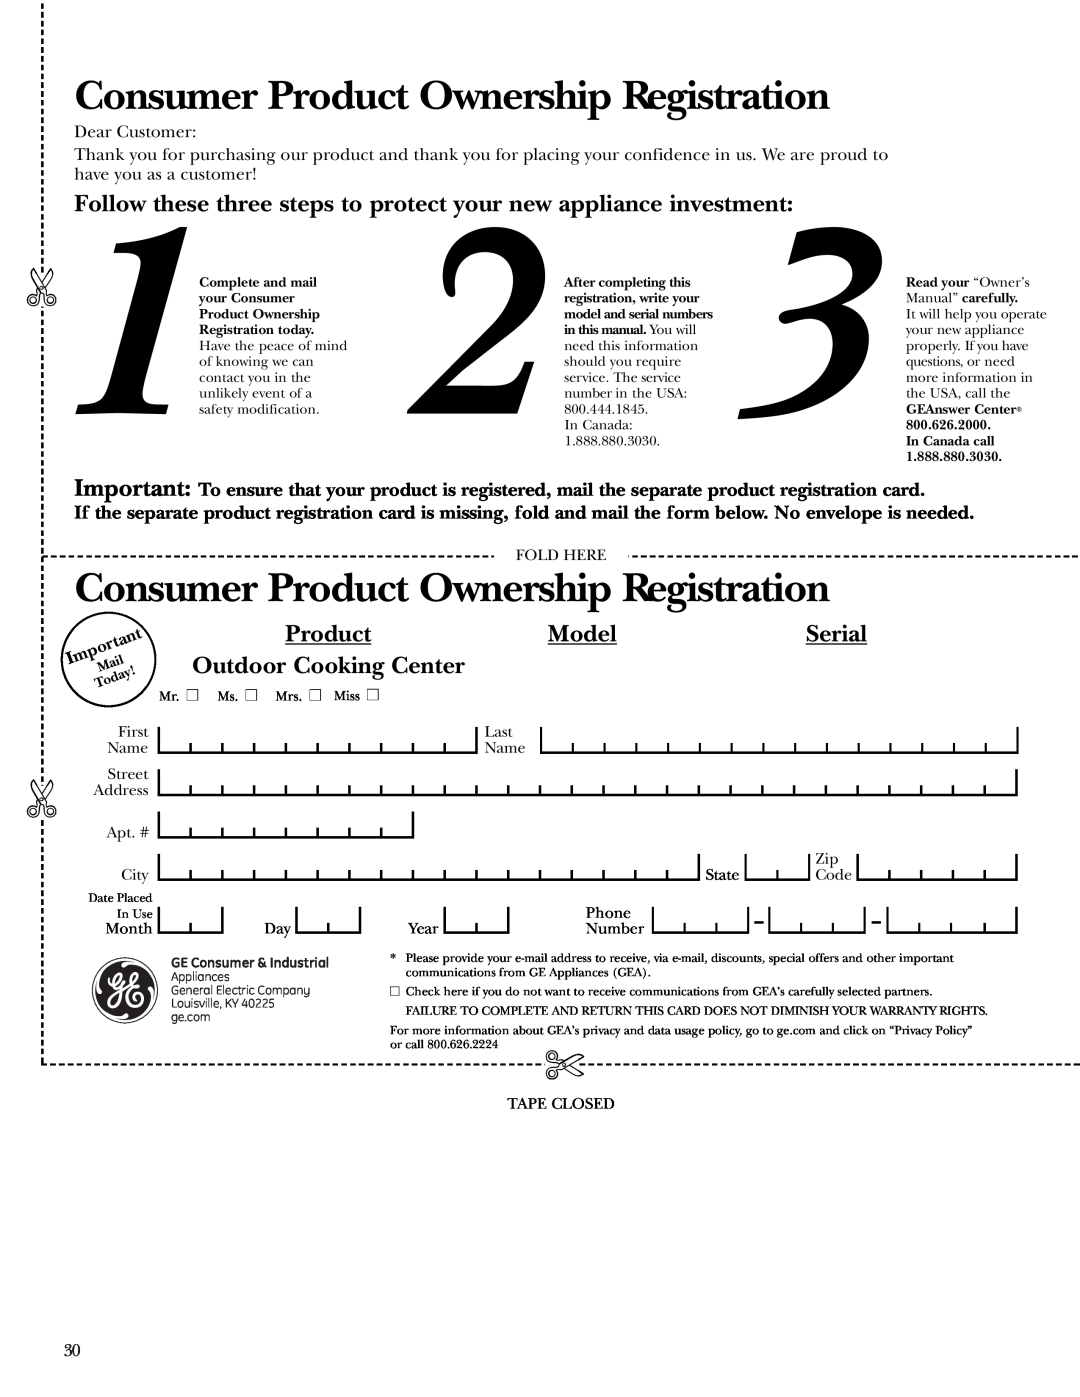 GE ZGG36N31 Consumer Product Ownership Registration, Follow these three steps to protect your new appliance investment 